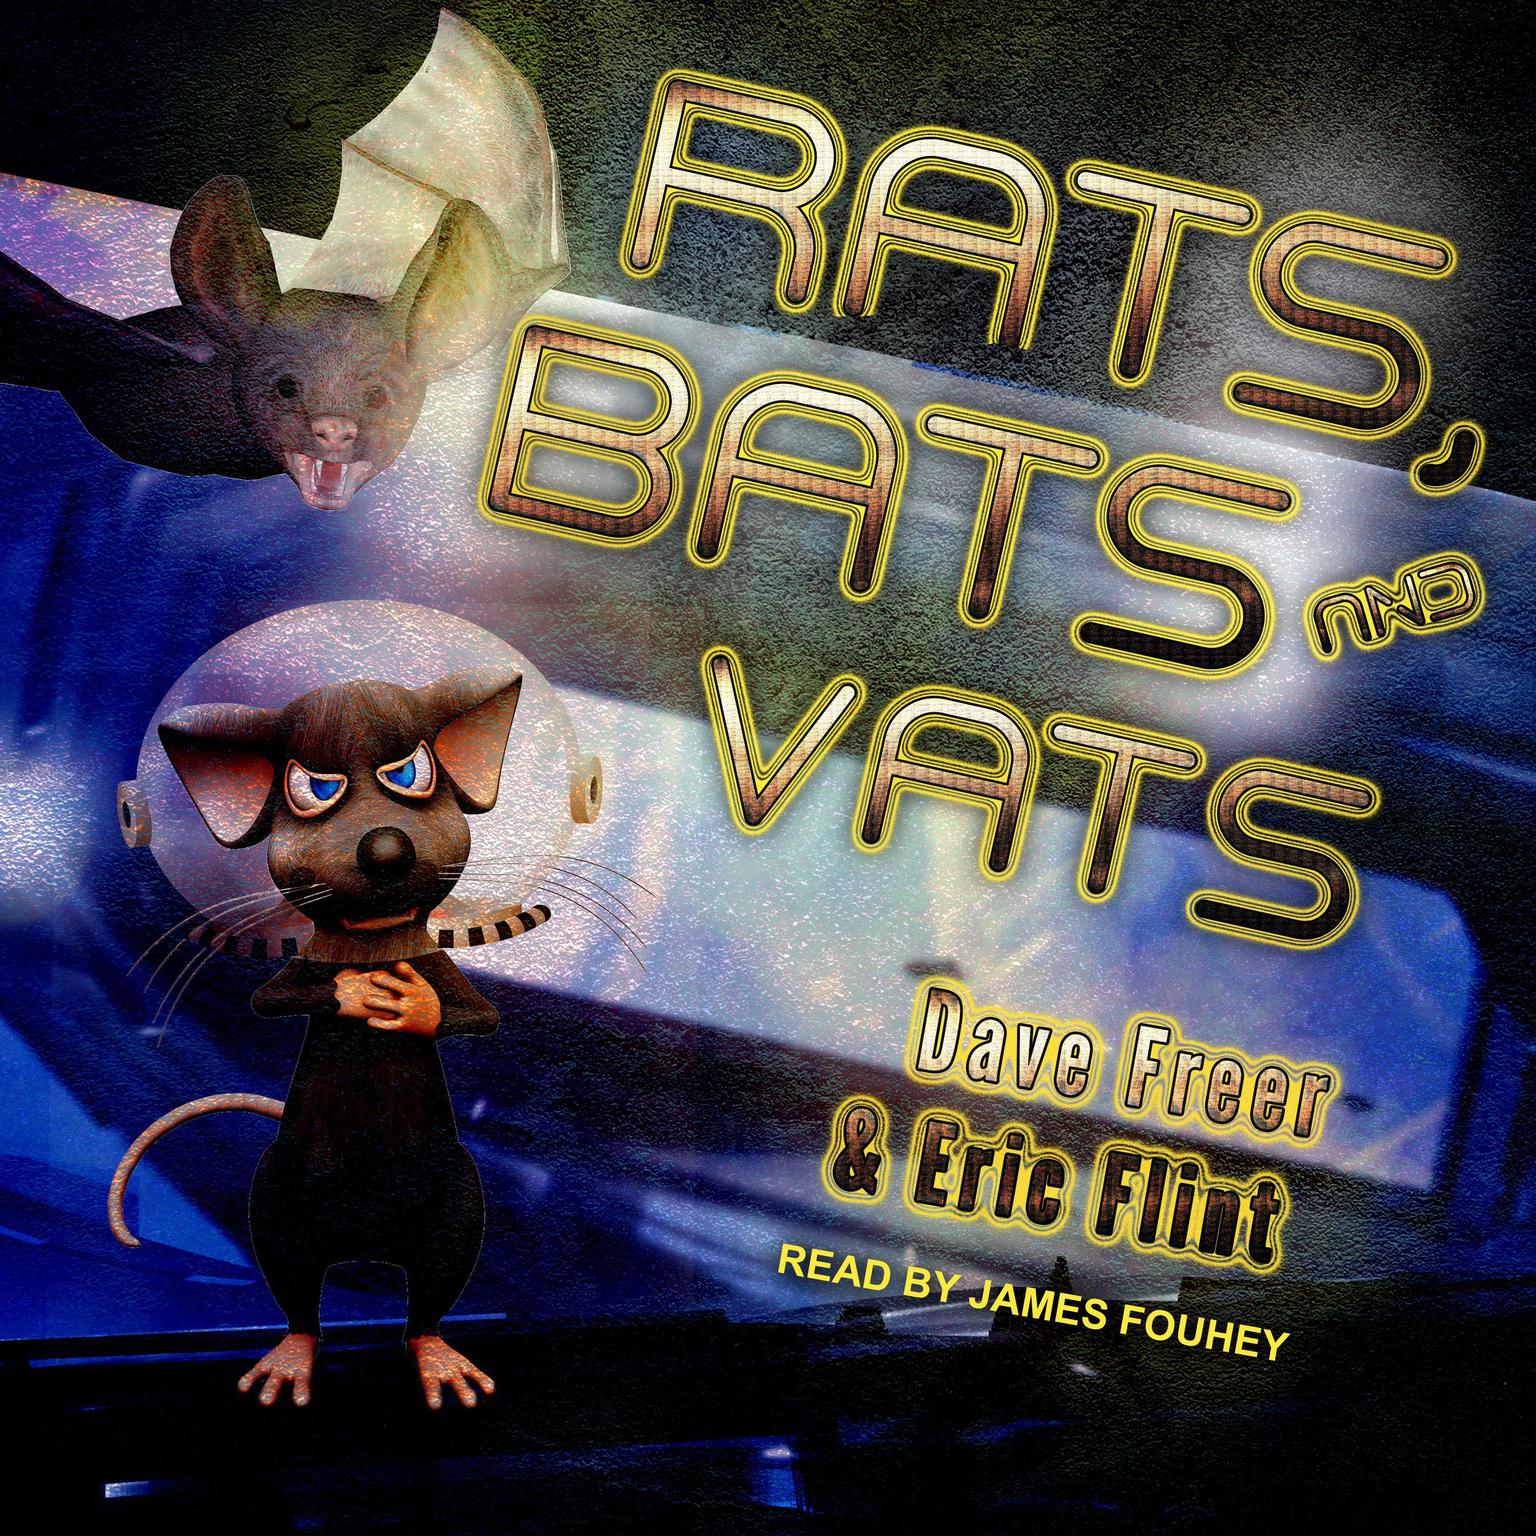 Rats, Bats and Vats Audiobook, by Dave Freer